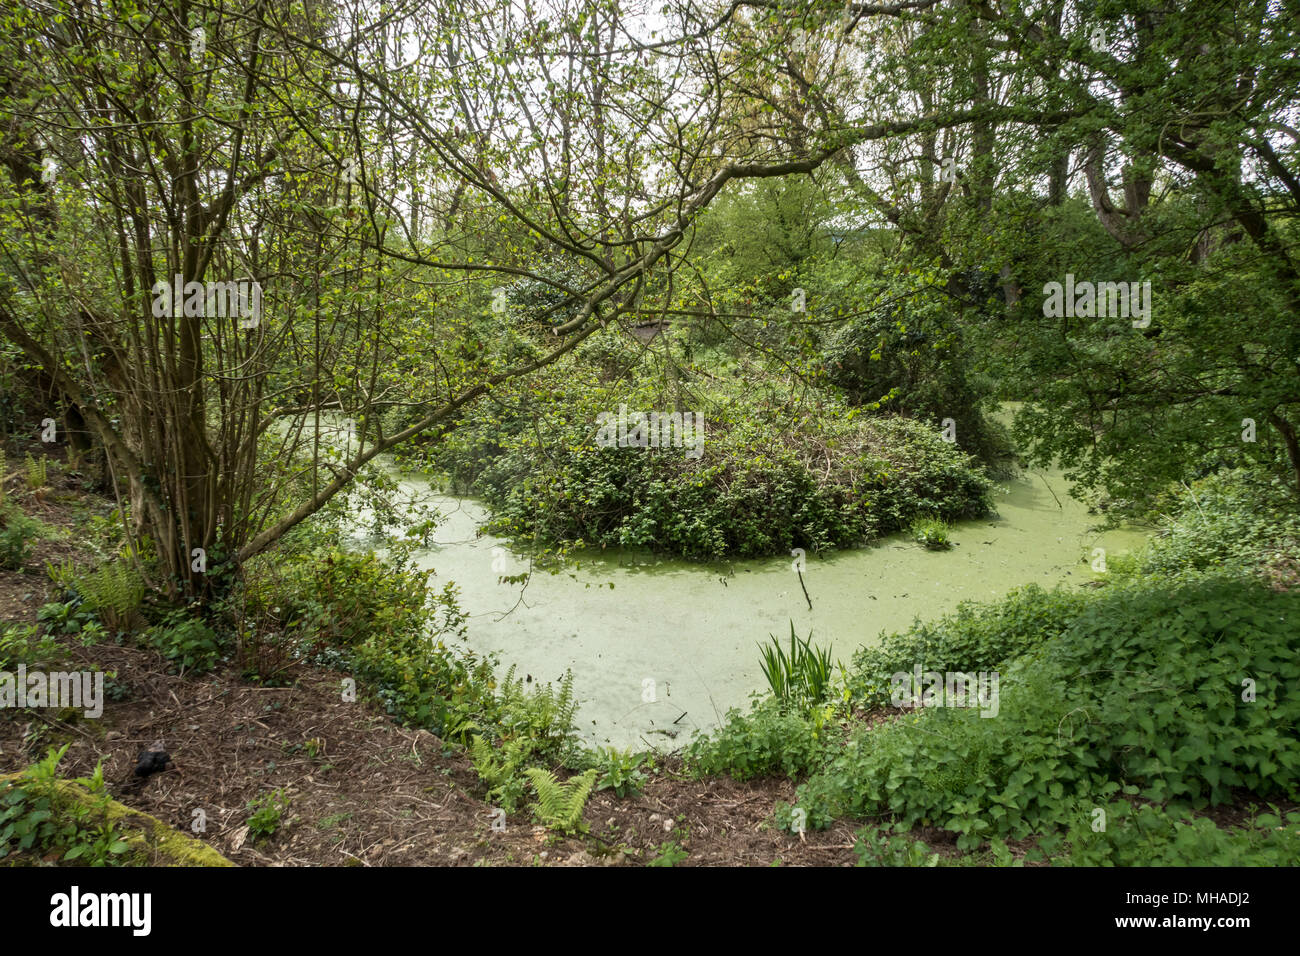 A woodland pool or pond covered in blanket weed. Stock Photo